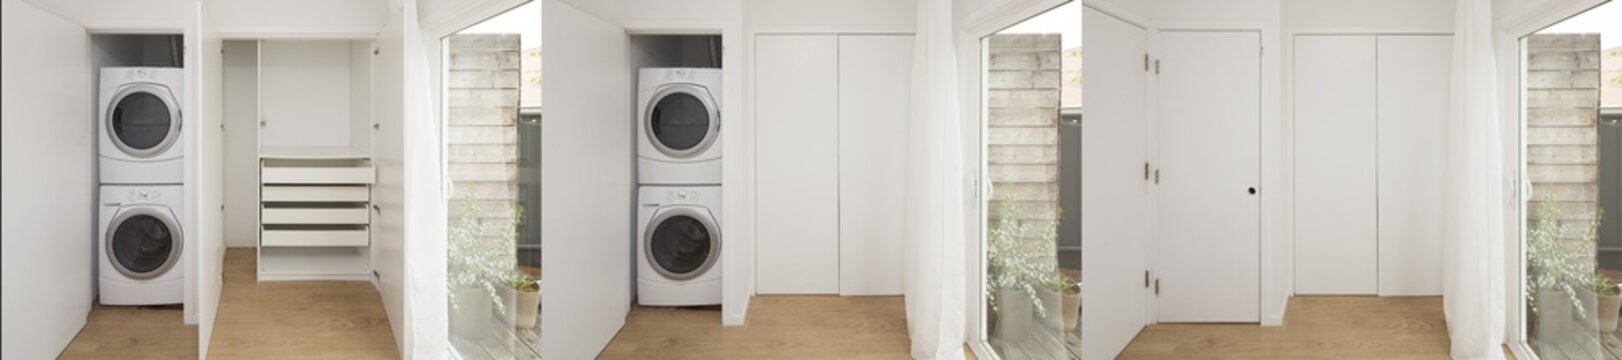 Stacked Washer And Dryer Design Ideas